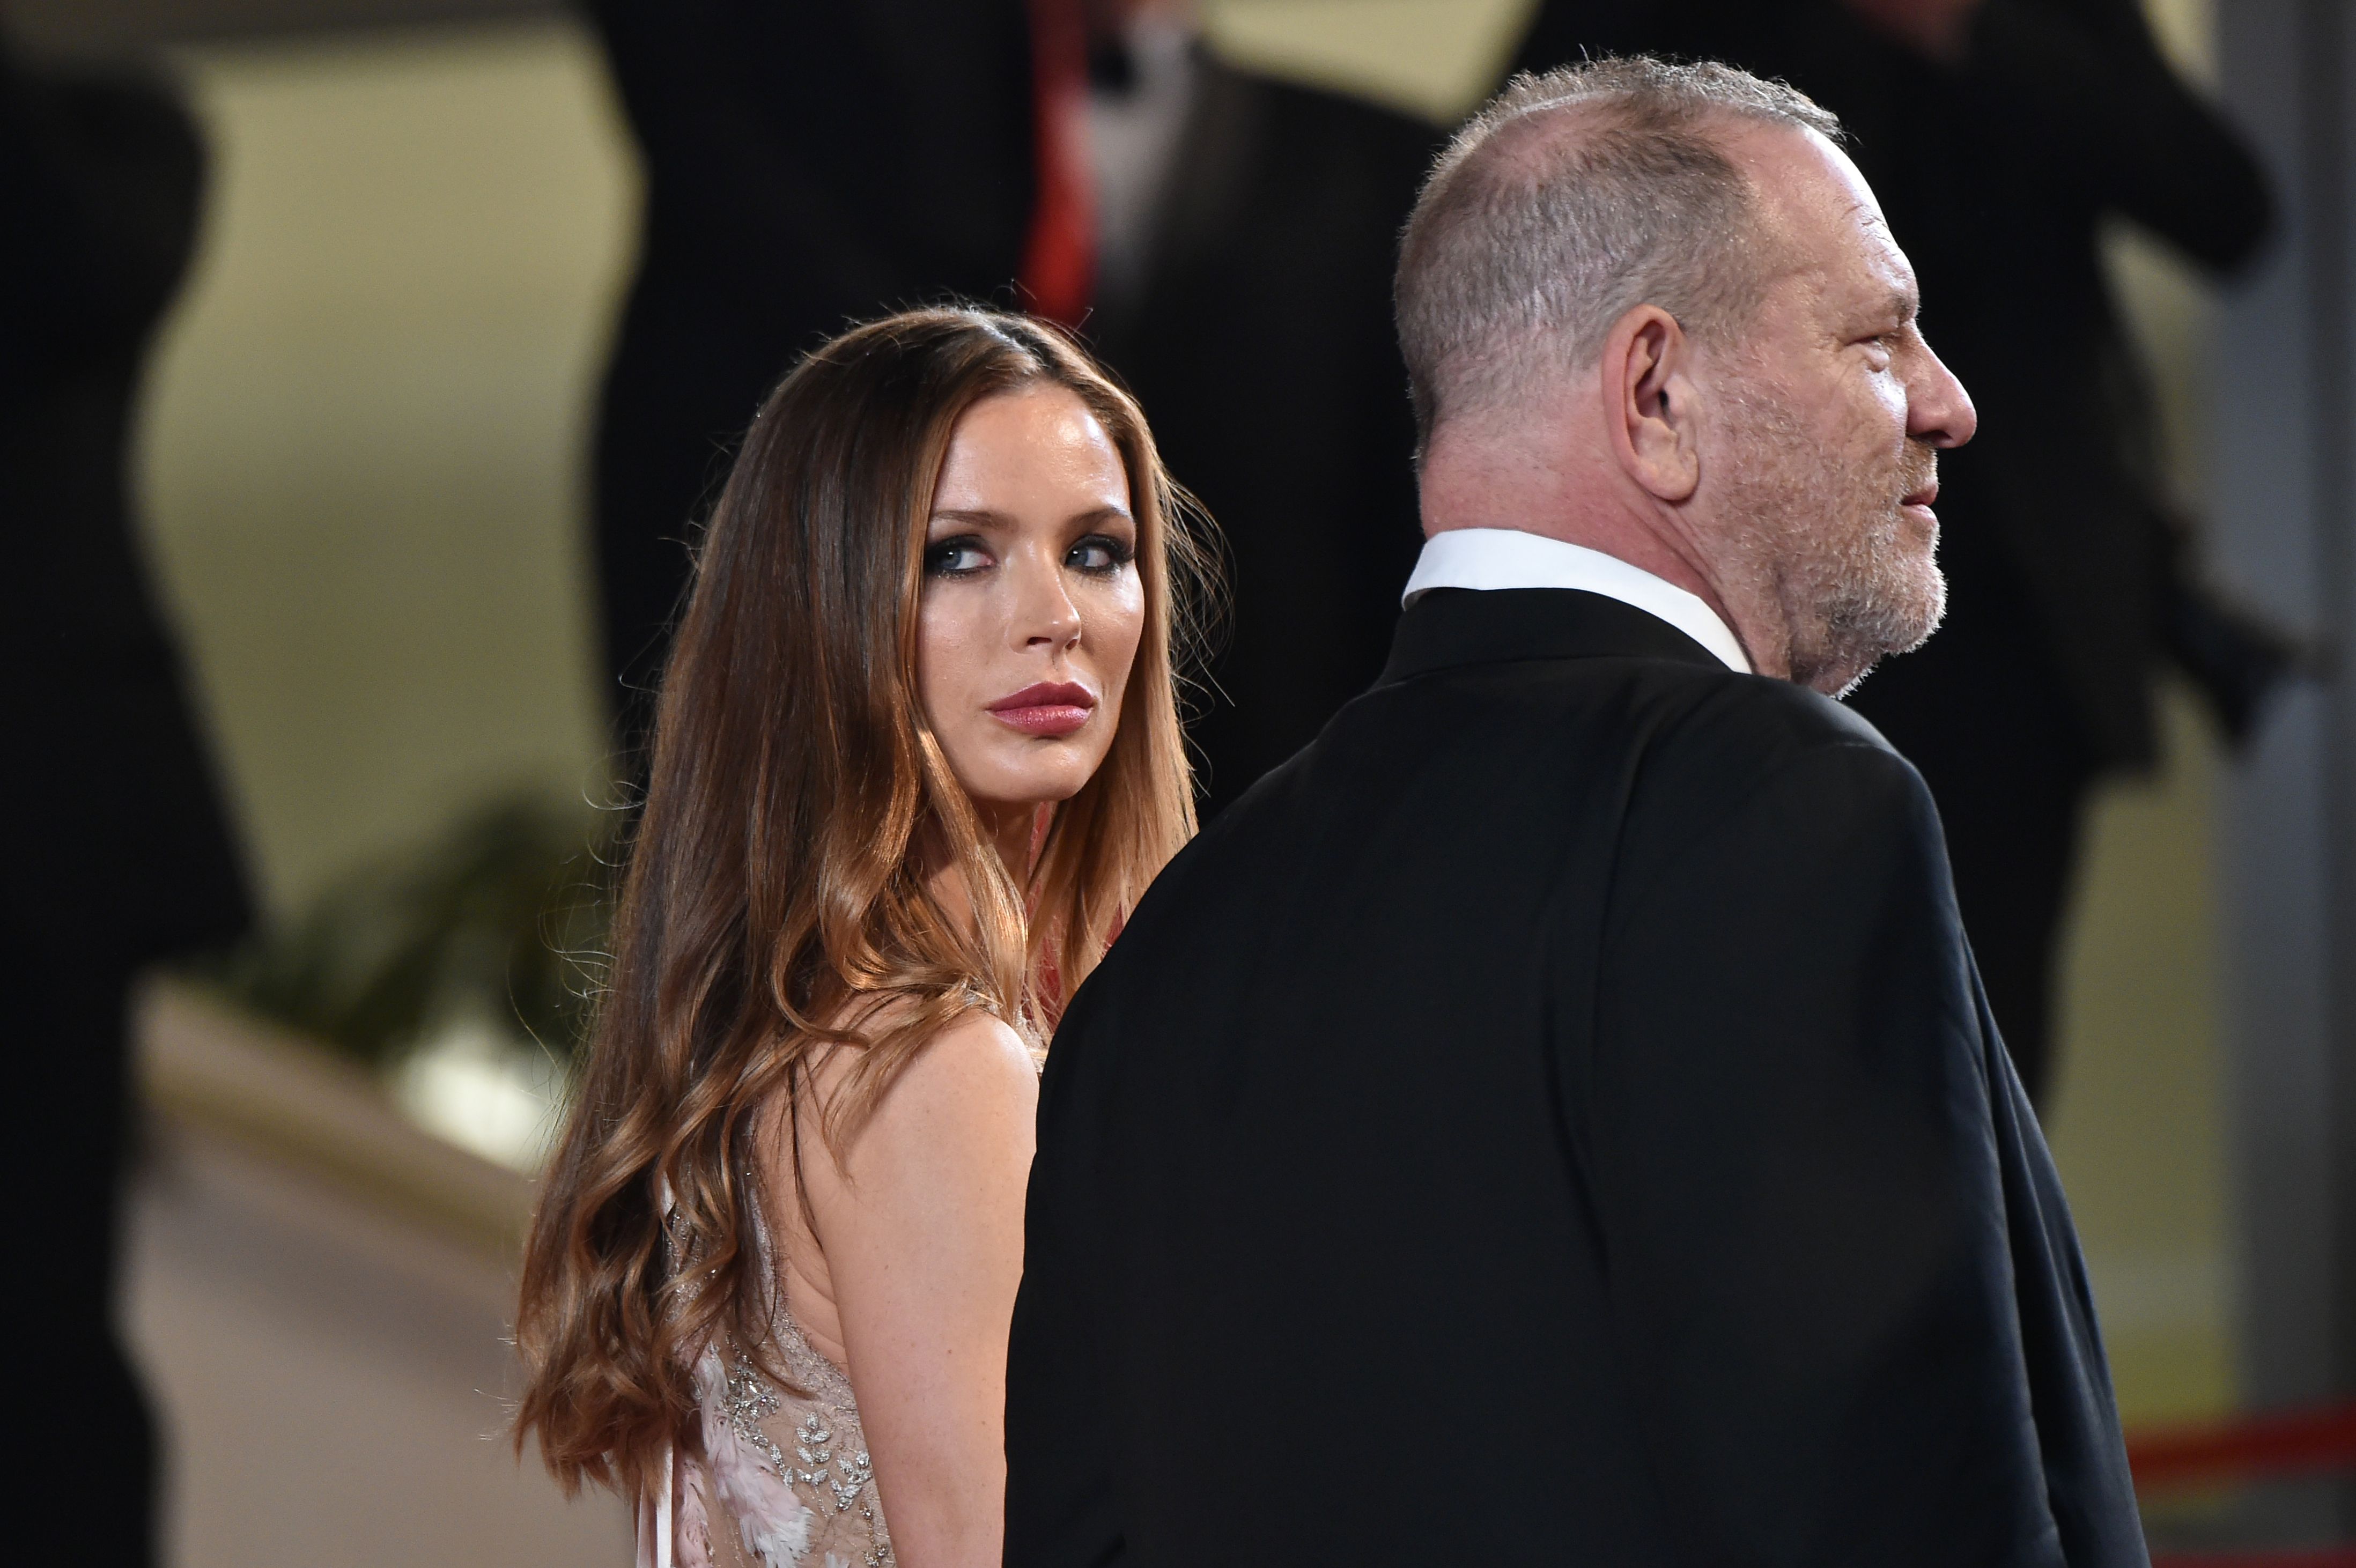 Harvey Weinstein and his wife actress Georgina Chapman arrive on May 16, 2016 for the screening of the film "Hands of Stone" at the 69th Cannes Film Festival in Cannes, southern France. (Alberto Pizzoli—AFP/Getty Images)